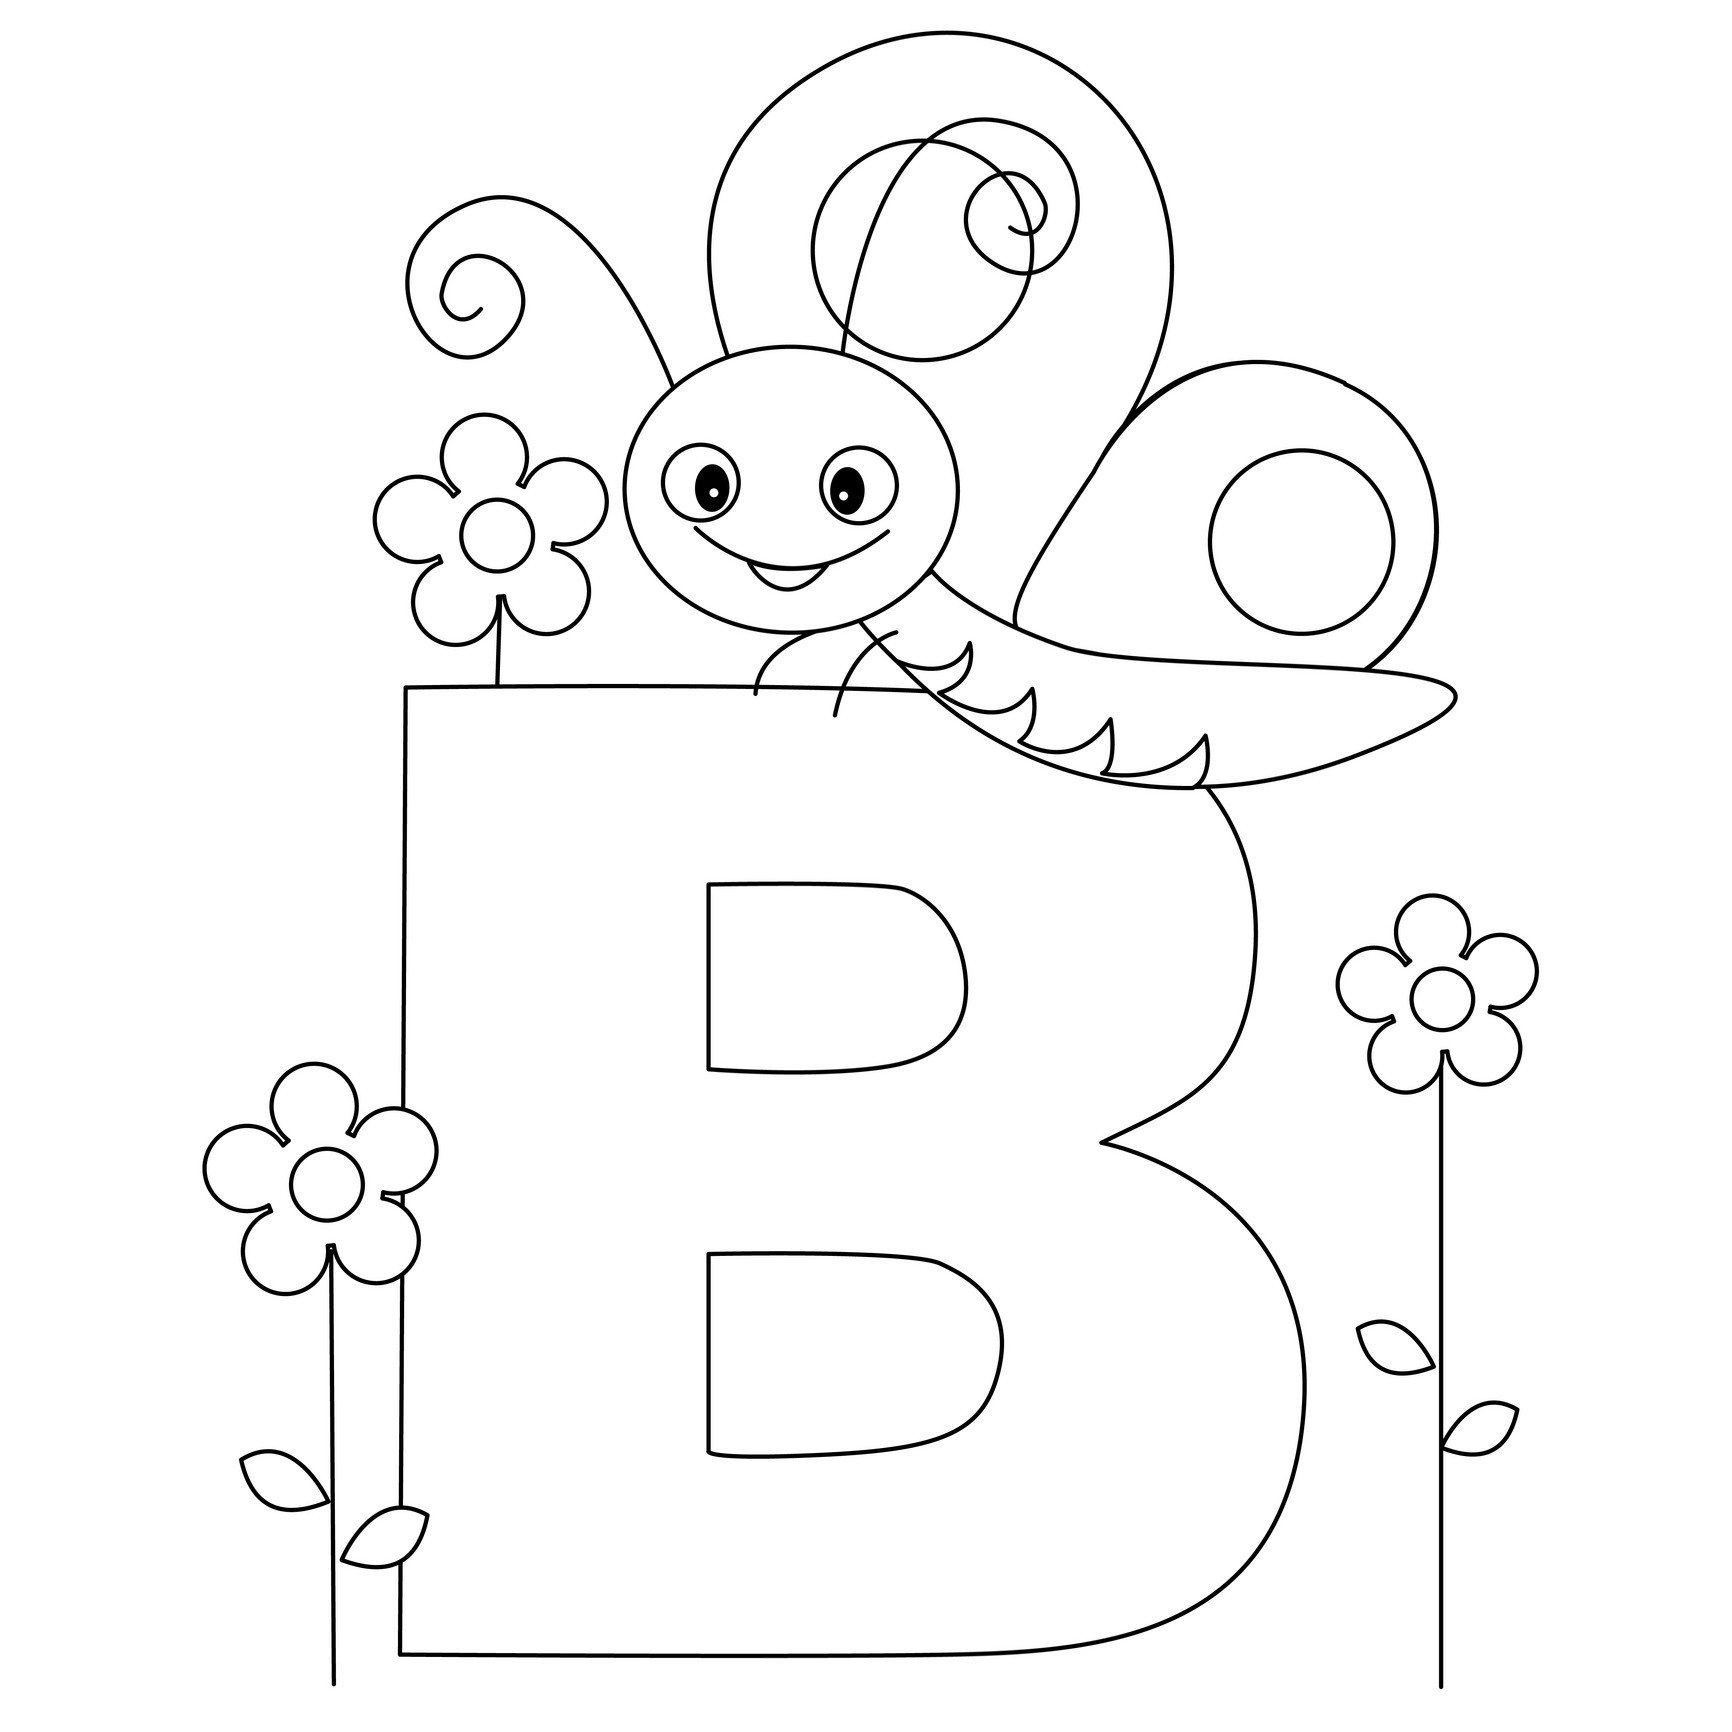 Coloring Pages : Free Printable Alphabet Coloring Pages For Kids - Free Printable Alphabet Coloring Pages